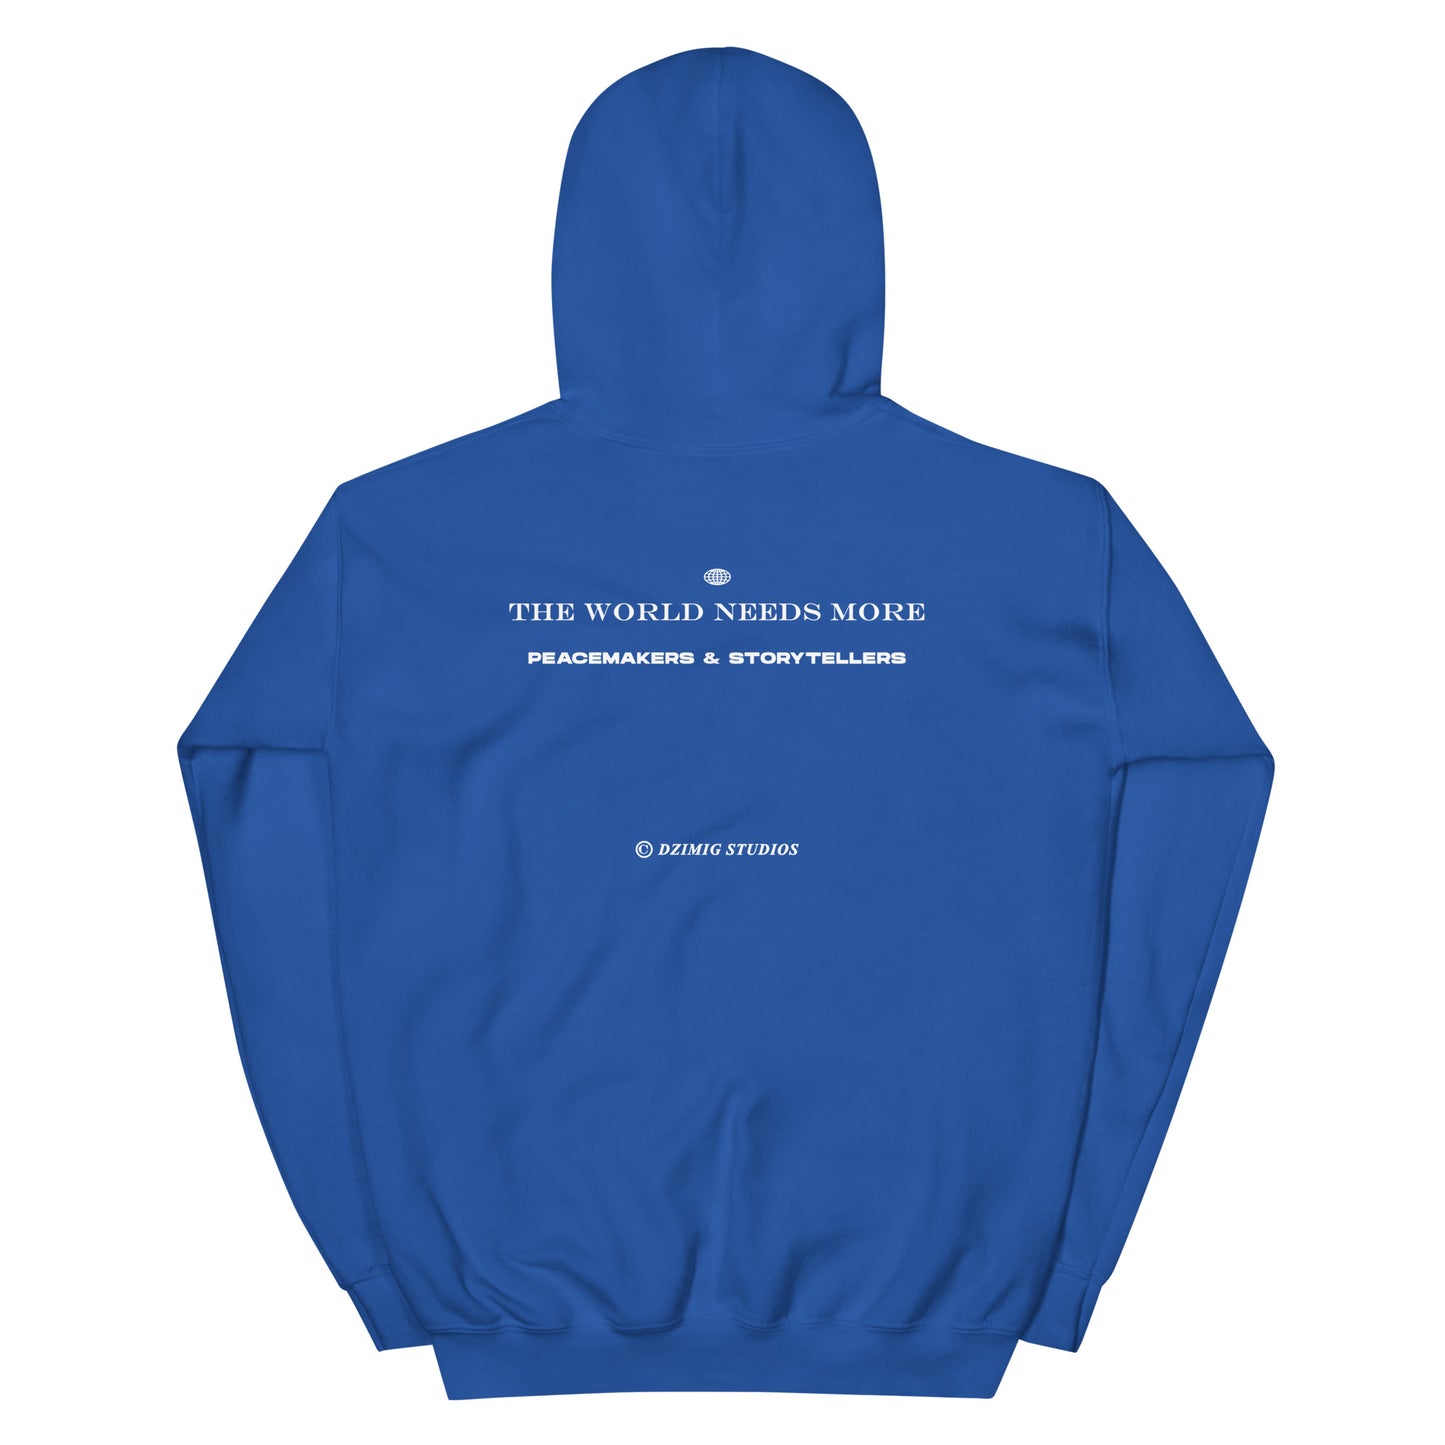 Unisex hoodies. PEACEMAKERS HOODIES are curated and designed under Dzimig Studios' Peace Campaign Project. These hoodies are soft, smooth, stylish and perfect choice for everyday wear.